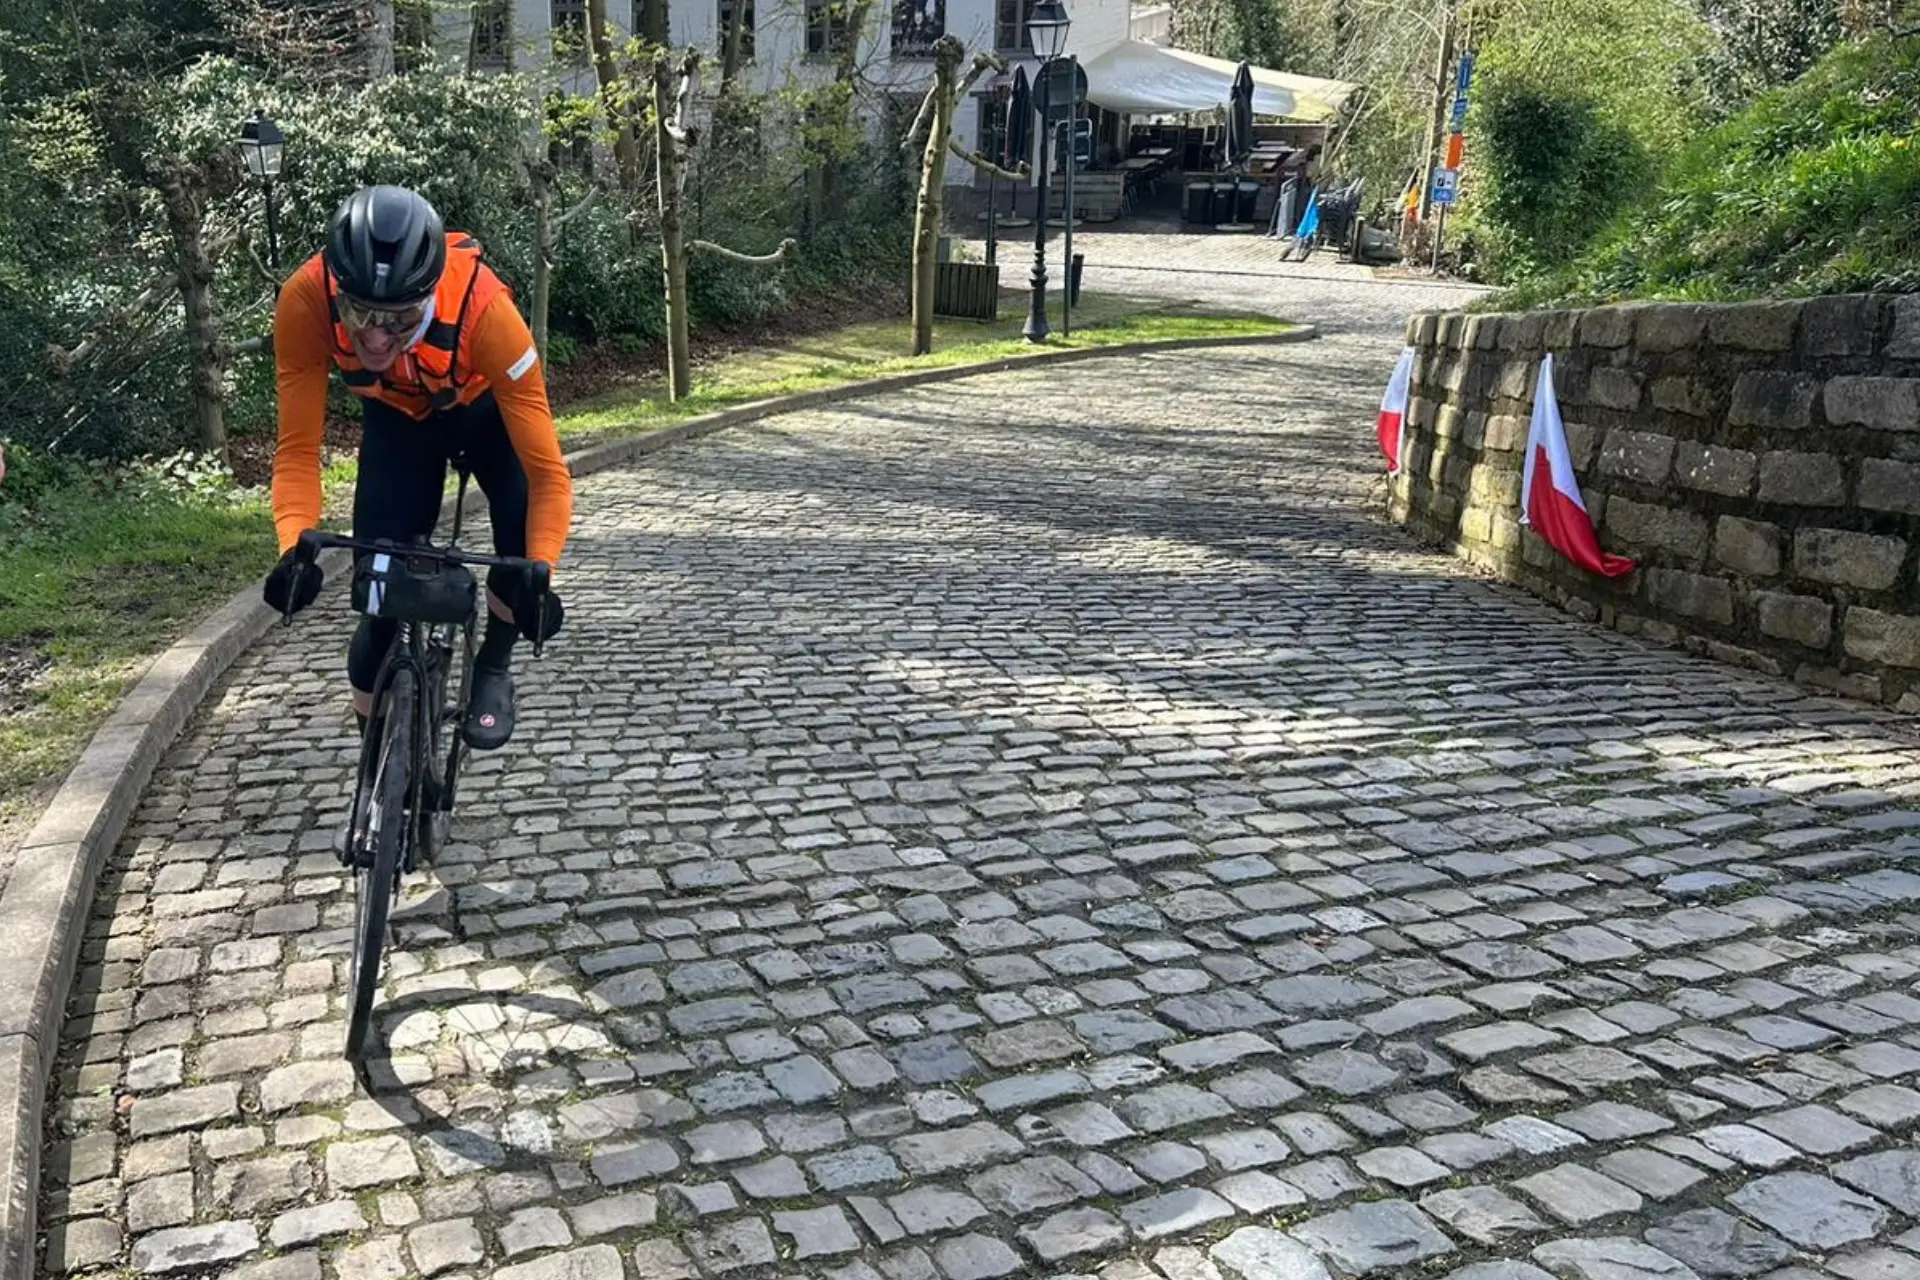 A road cyclist in bright orange gear is riding up a cobbled road